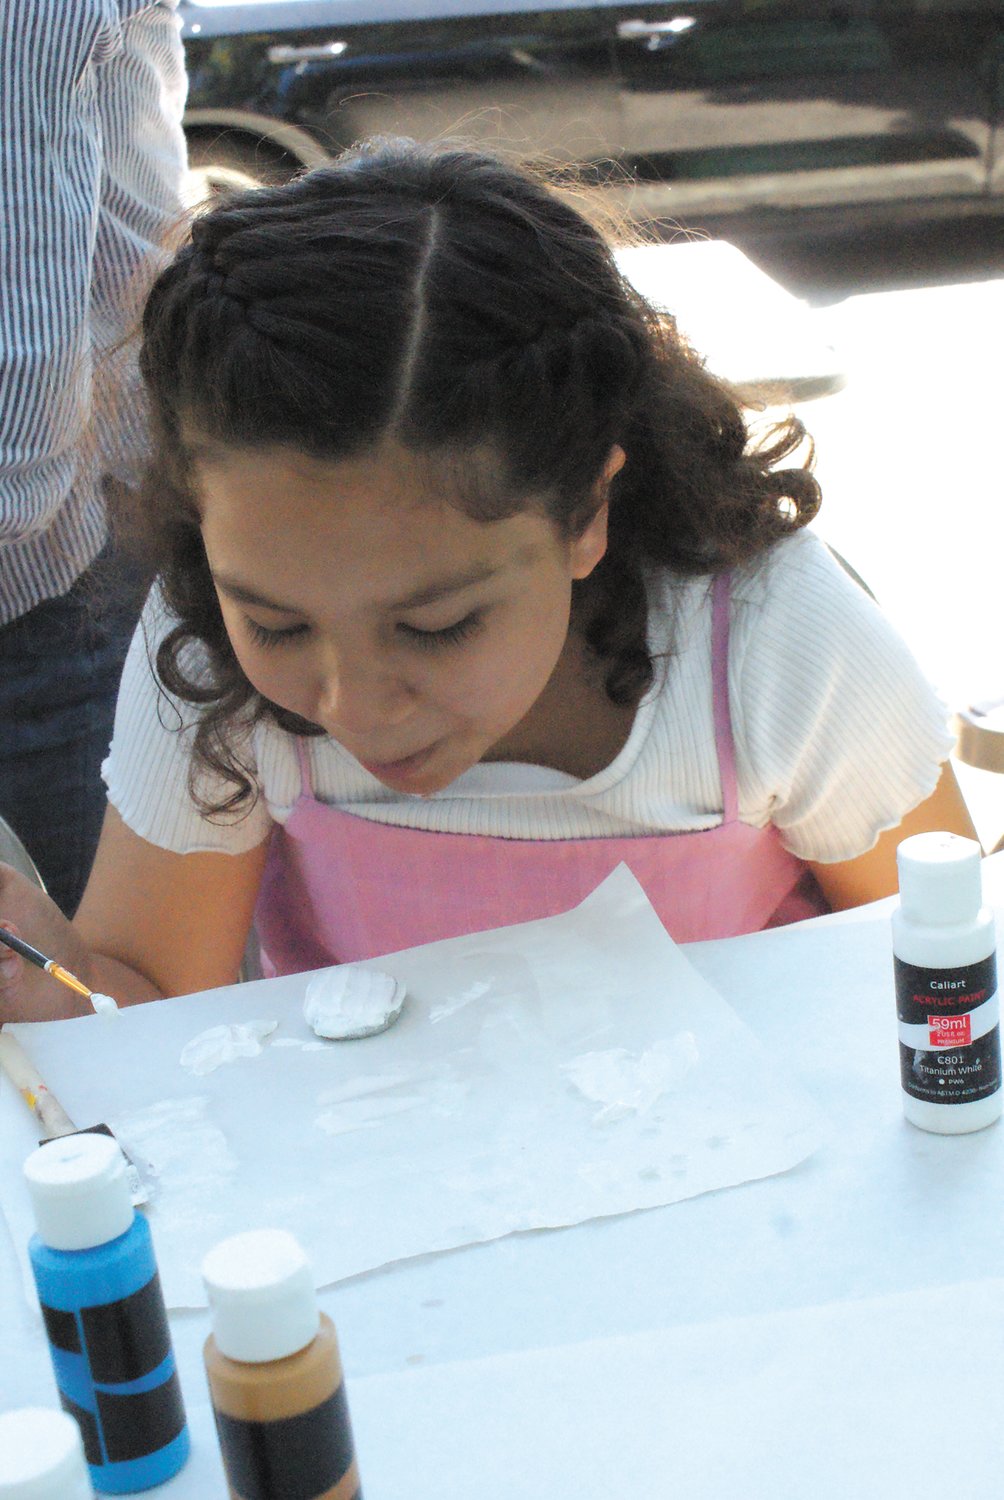 ROCKING AND ROLLING: Lex Hernandez, 10, blows on her newly painted rock to try and dry it so she can add another coat of paint at Oaklawn Library.